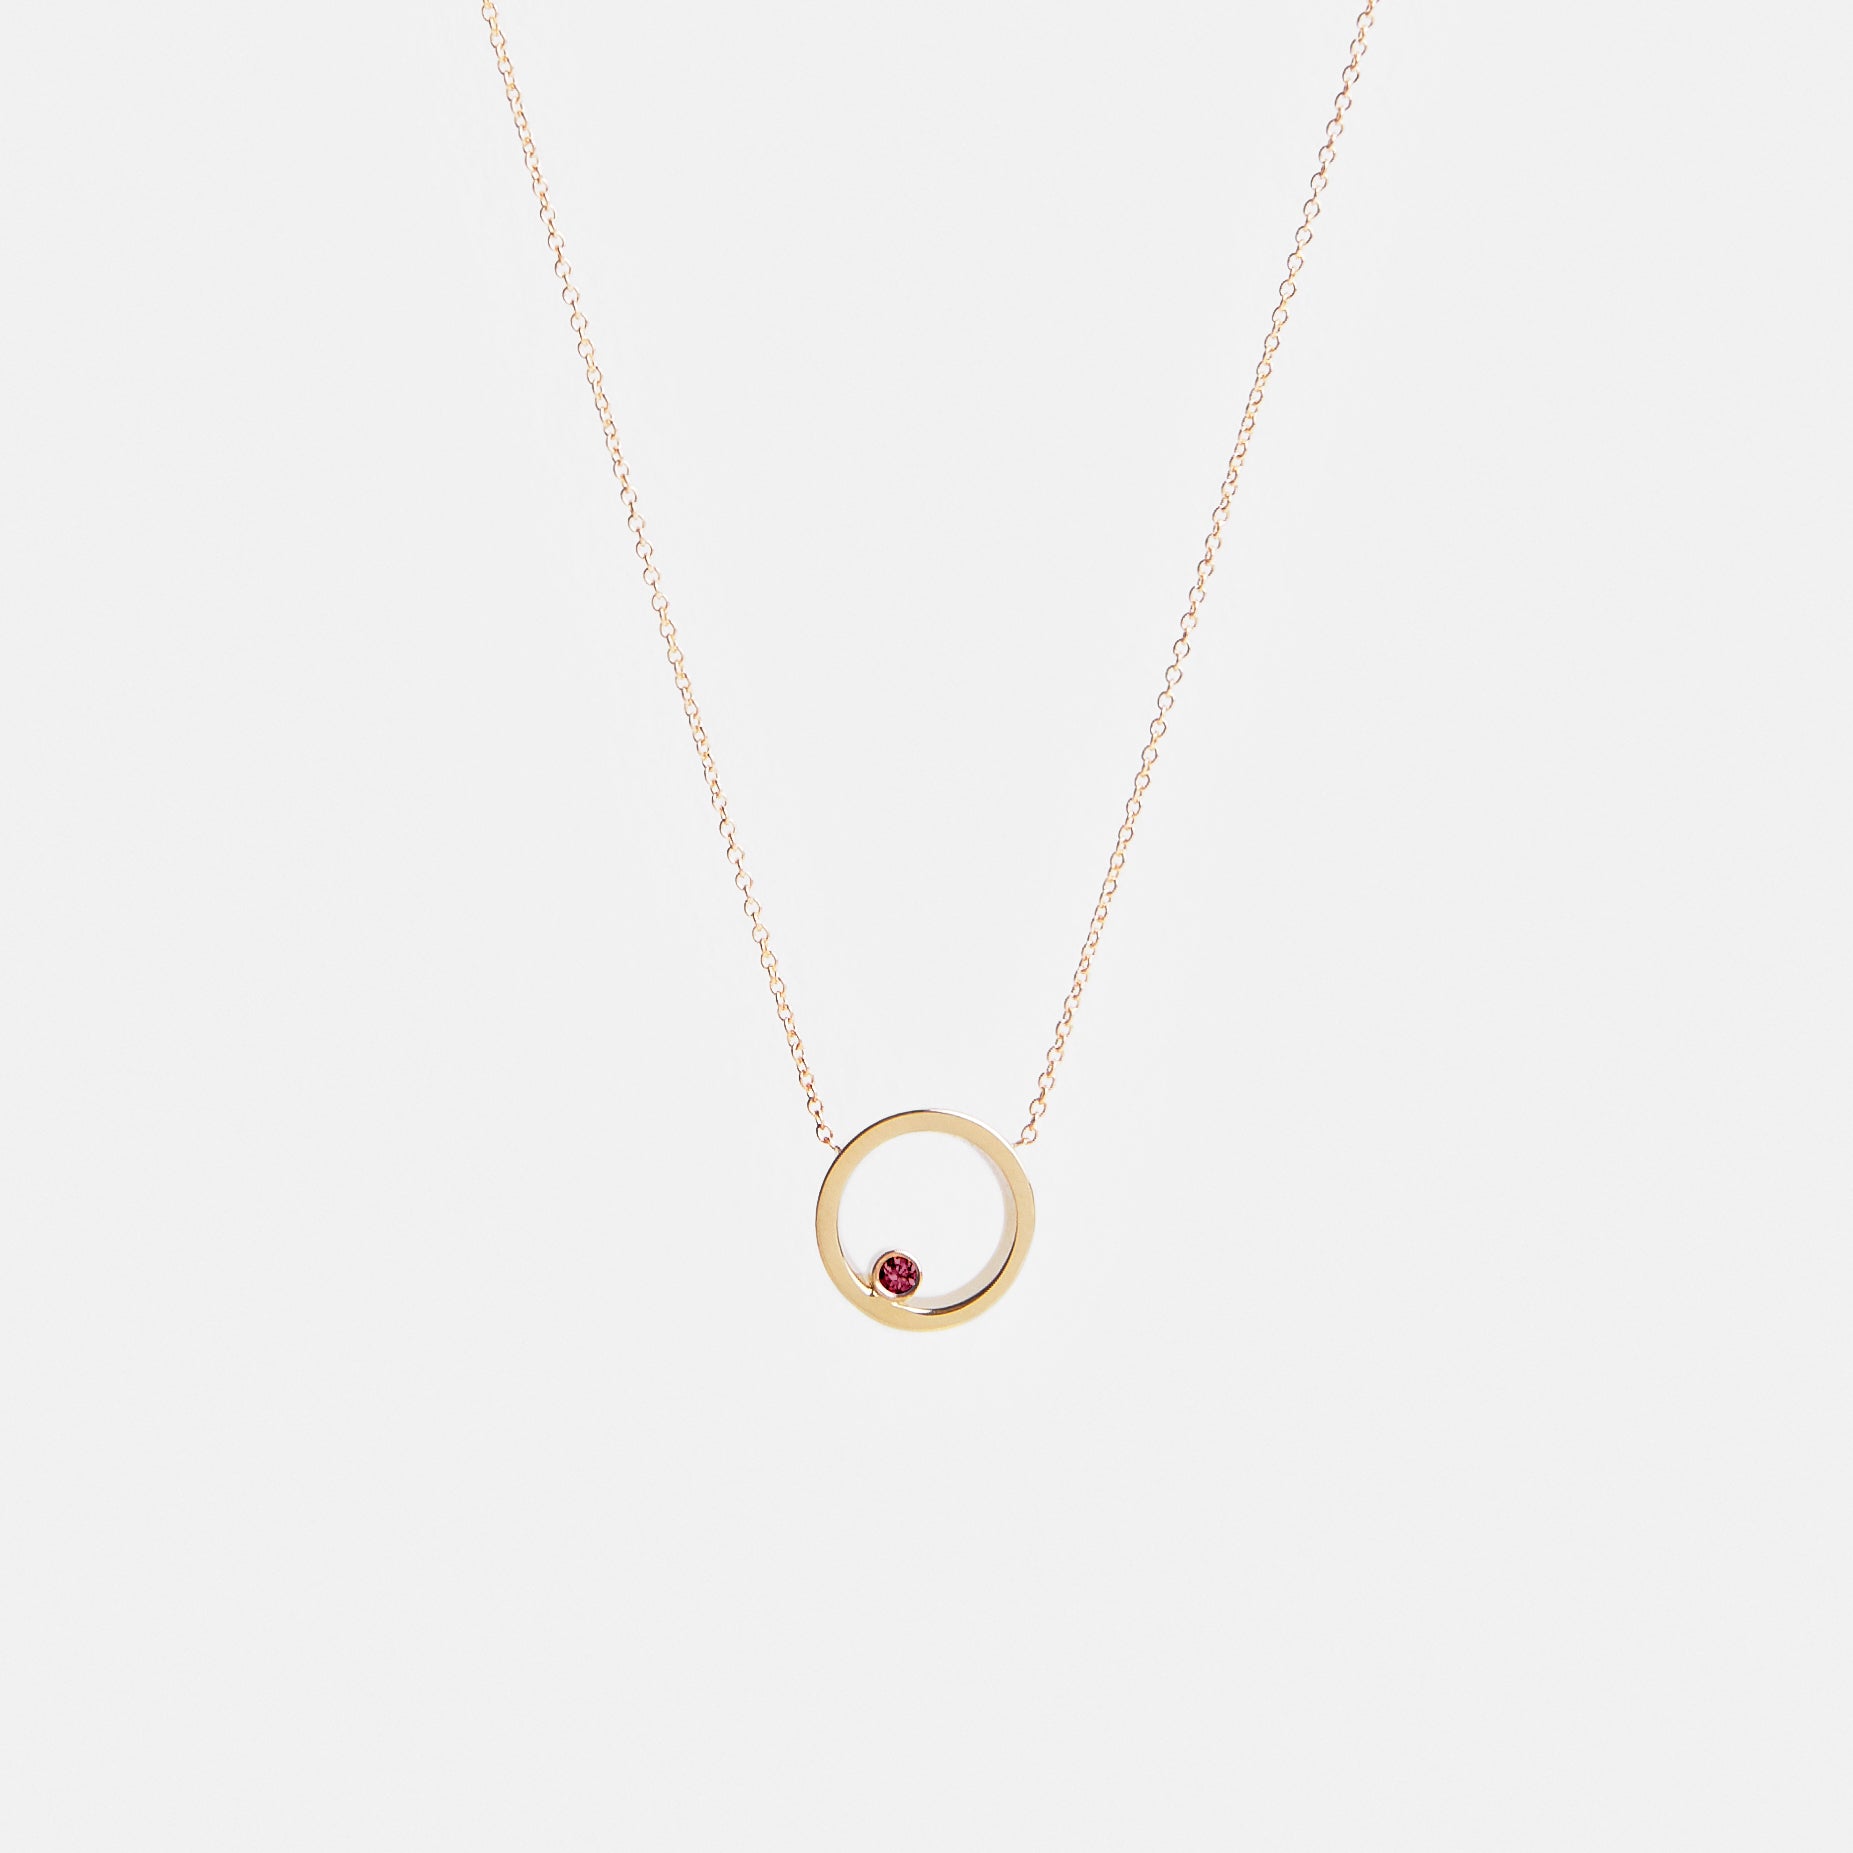 Ila Designer Necklace in 14k Gold set with Ruby By SHW Fine Jewelry NYC